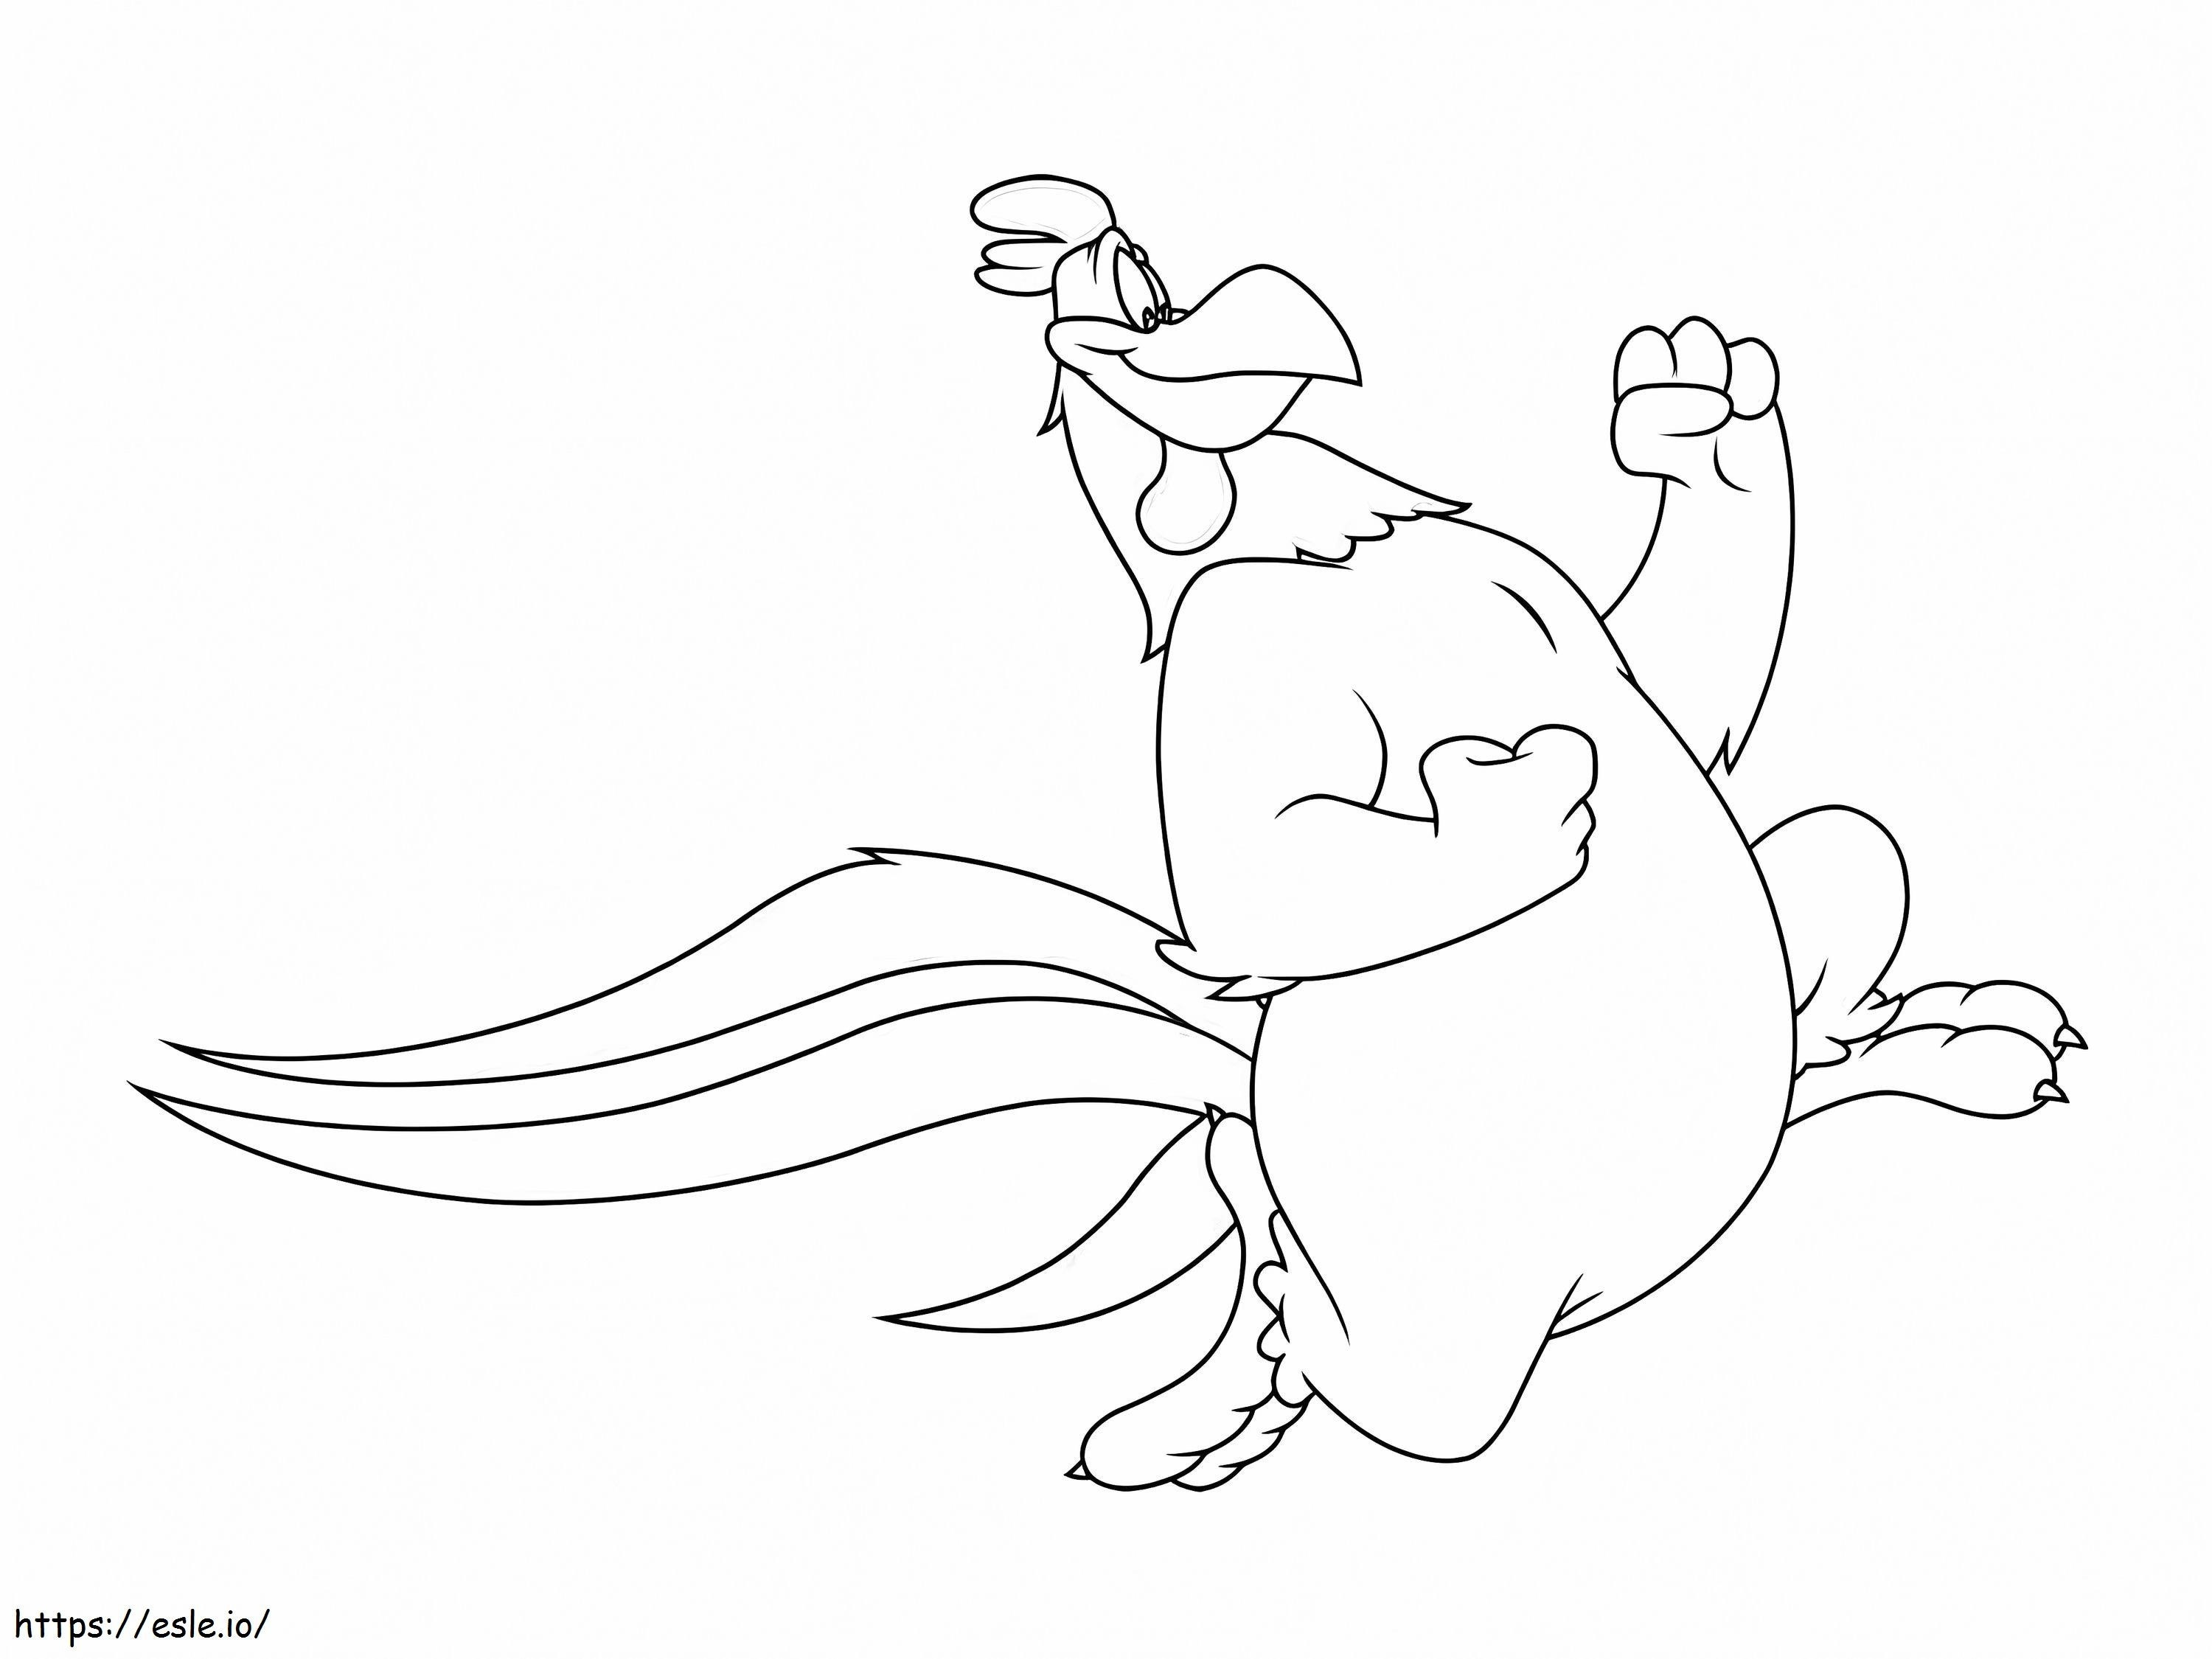 Foghorn Leghorn Running coloring page